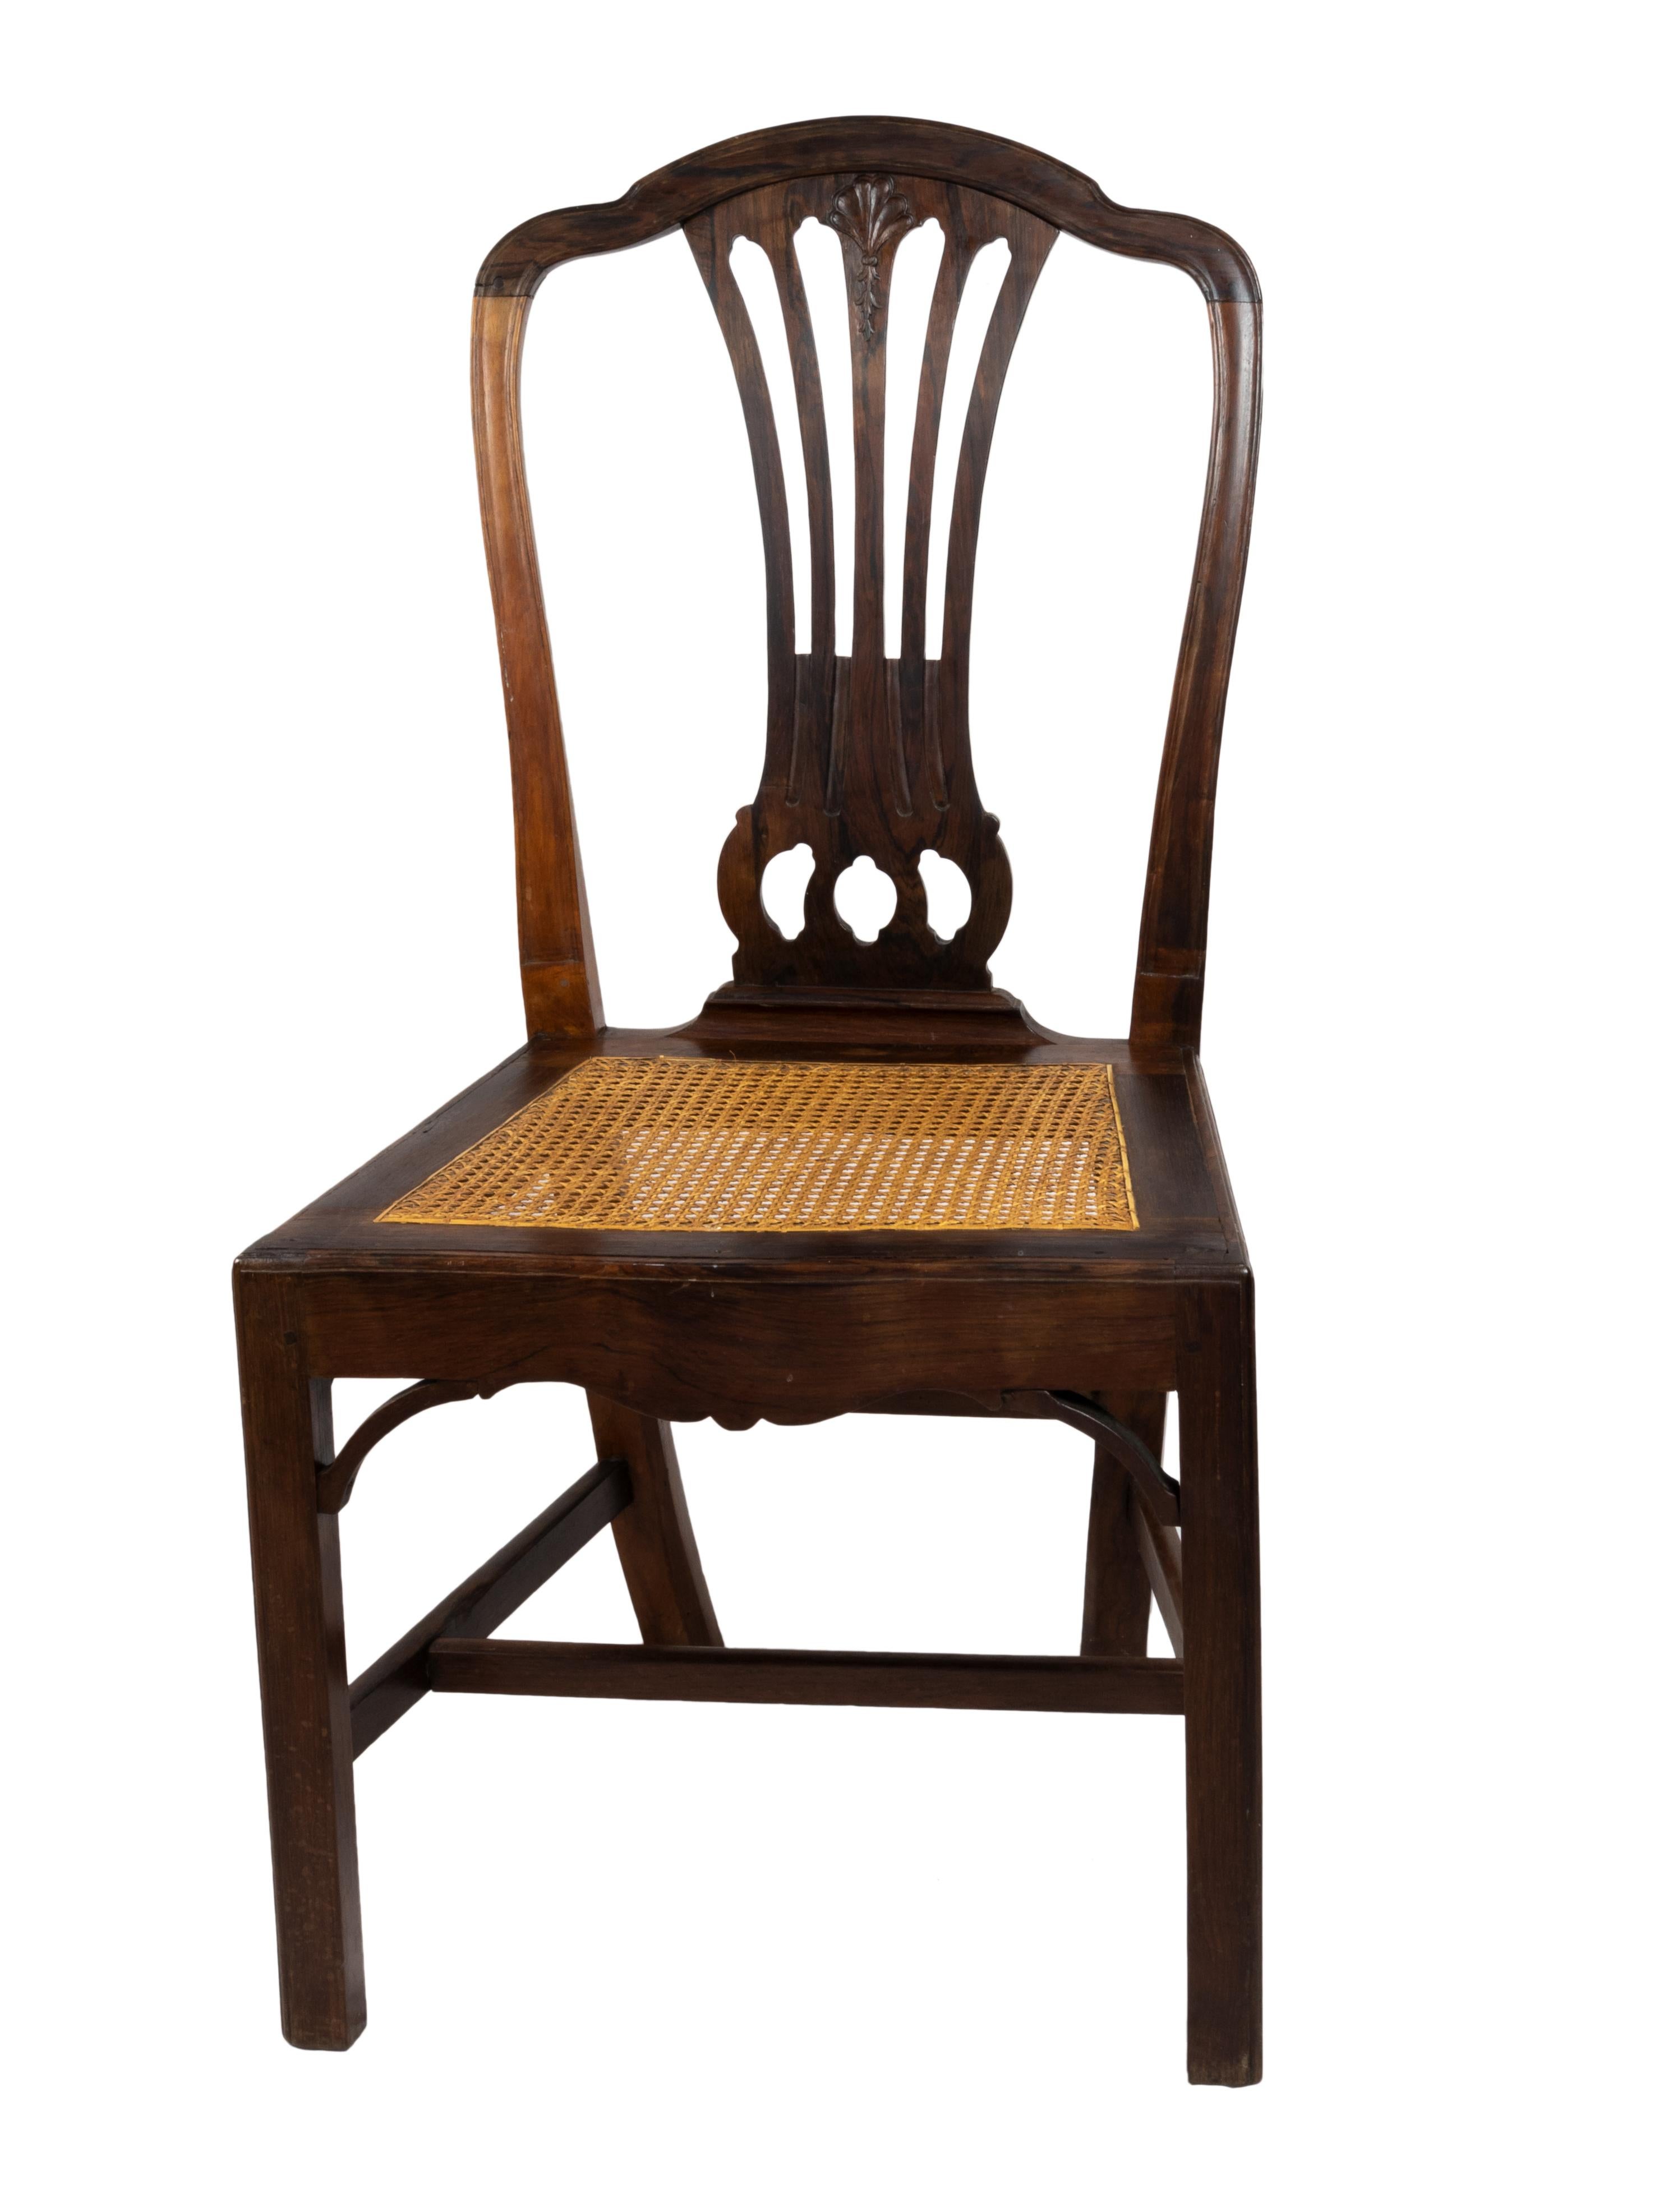 Portuguese Chippendale Style Amphora Chair, 19th Century For Sale